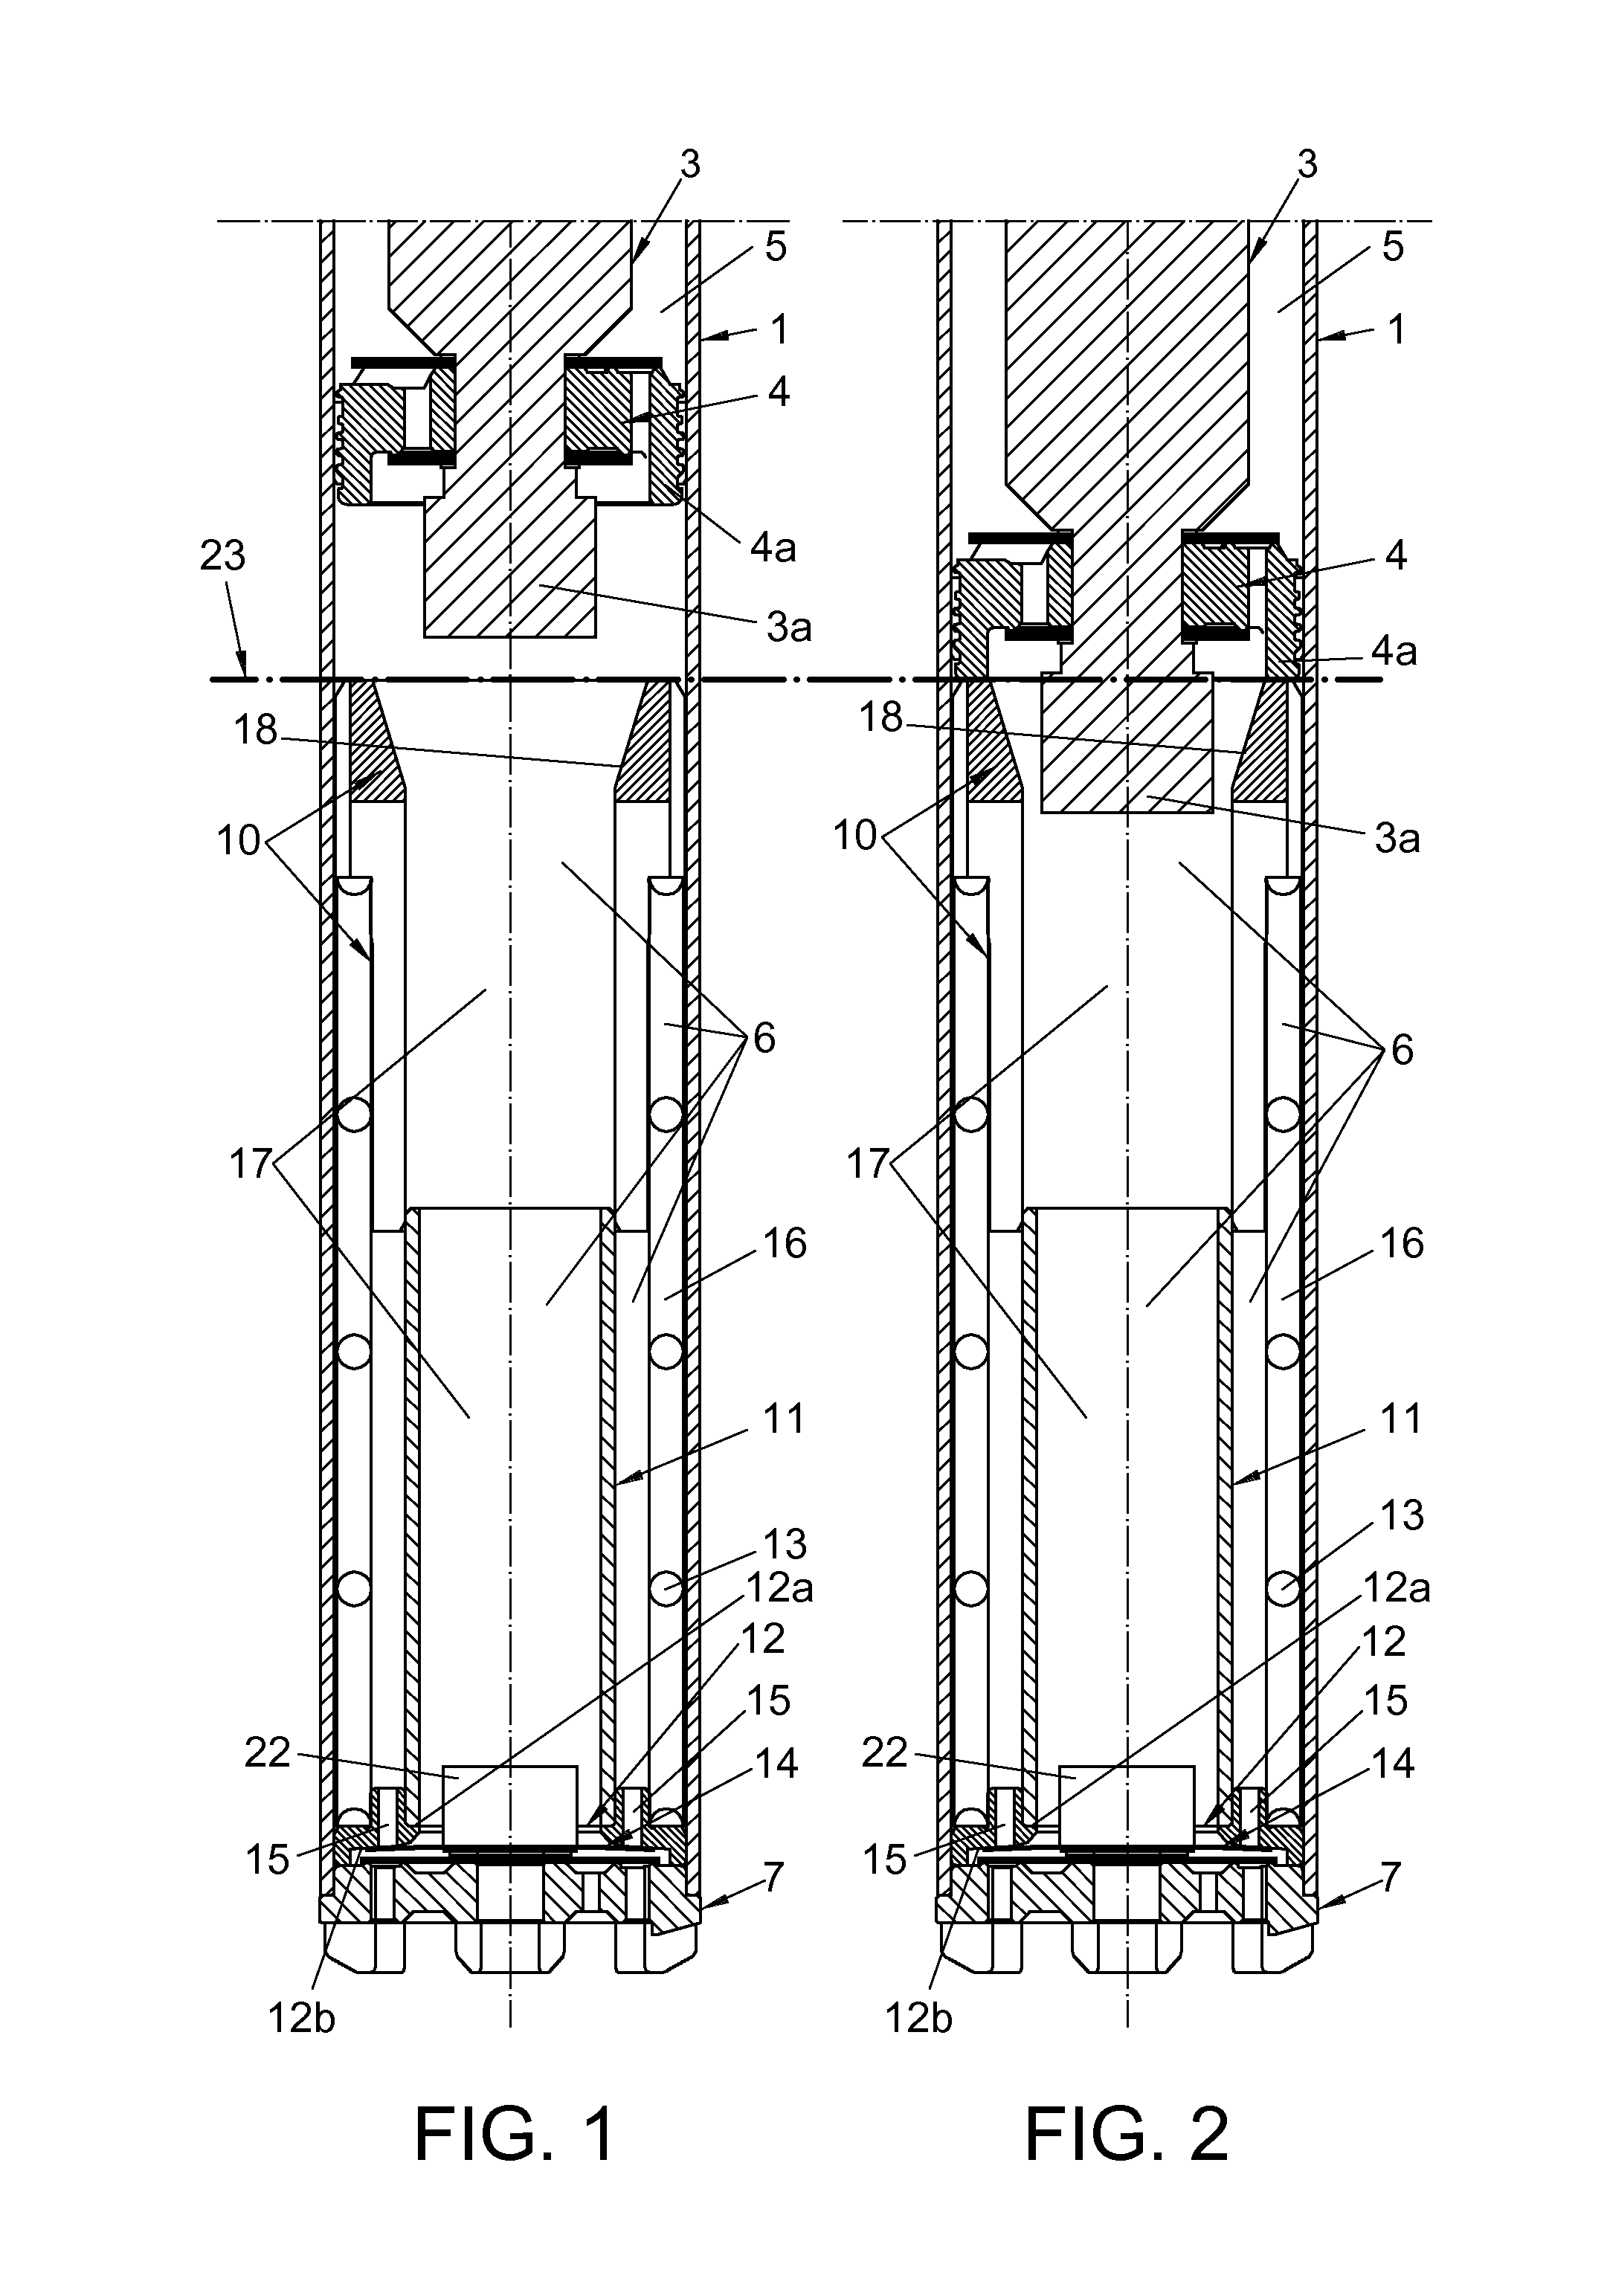 Variable load control system in a hydraulic device